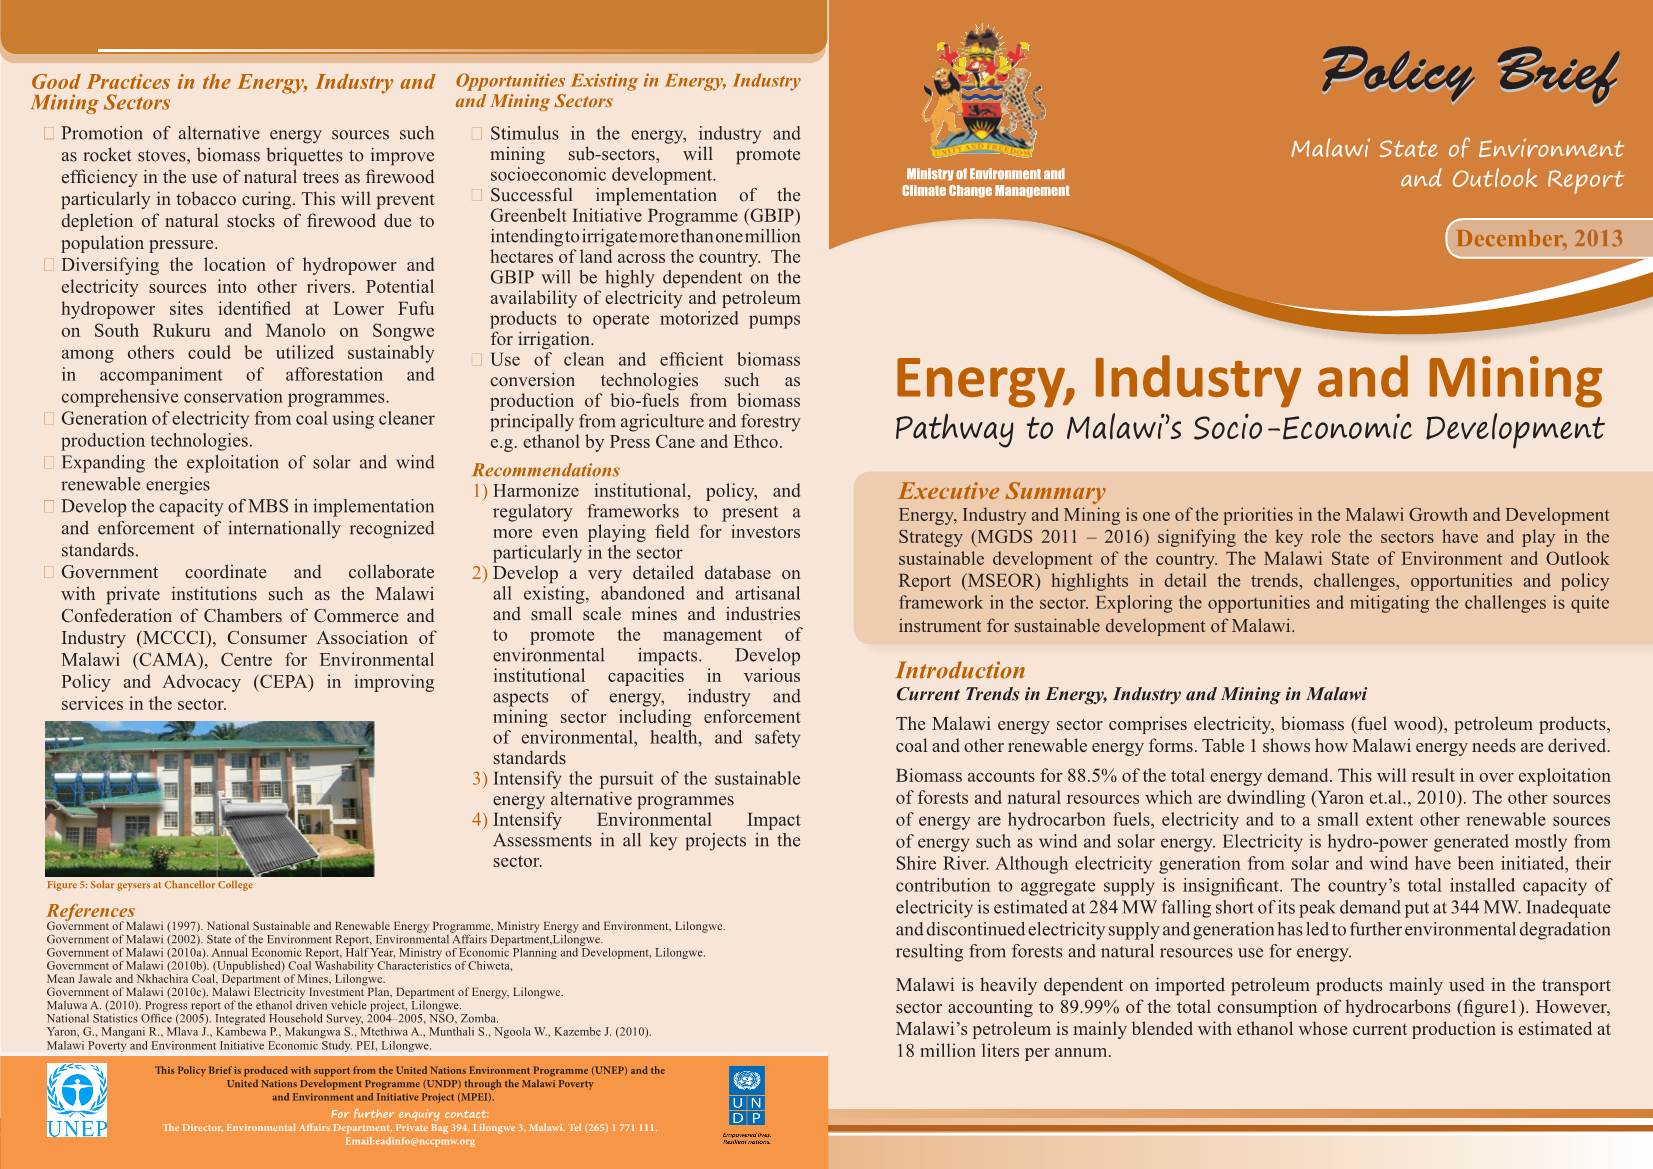 Energy, Industry and Mining Policy Brief